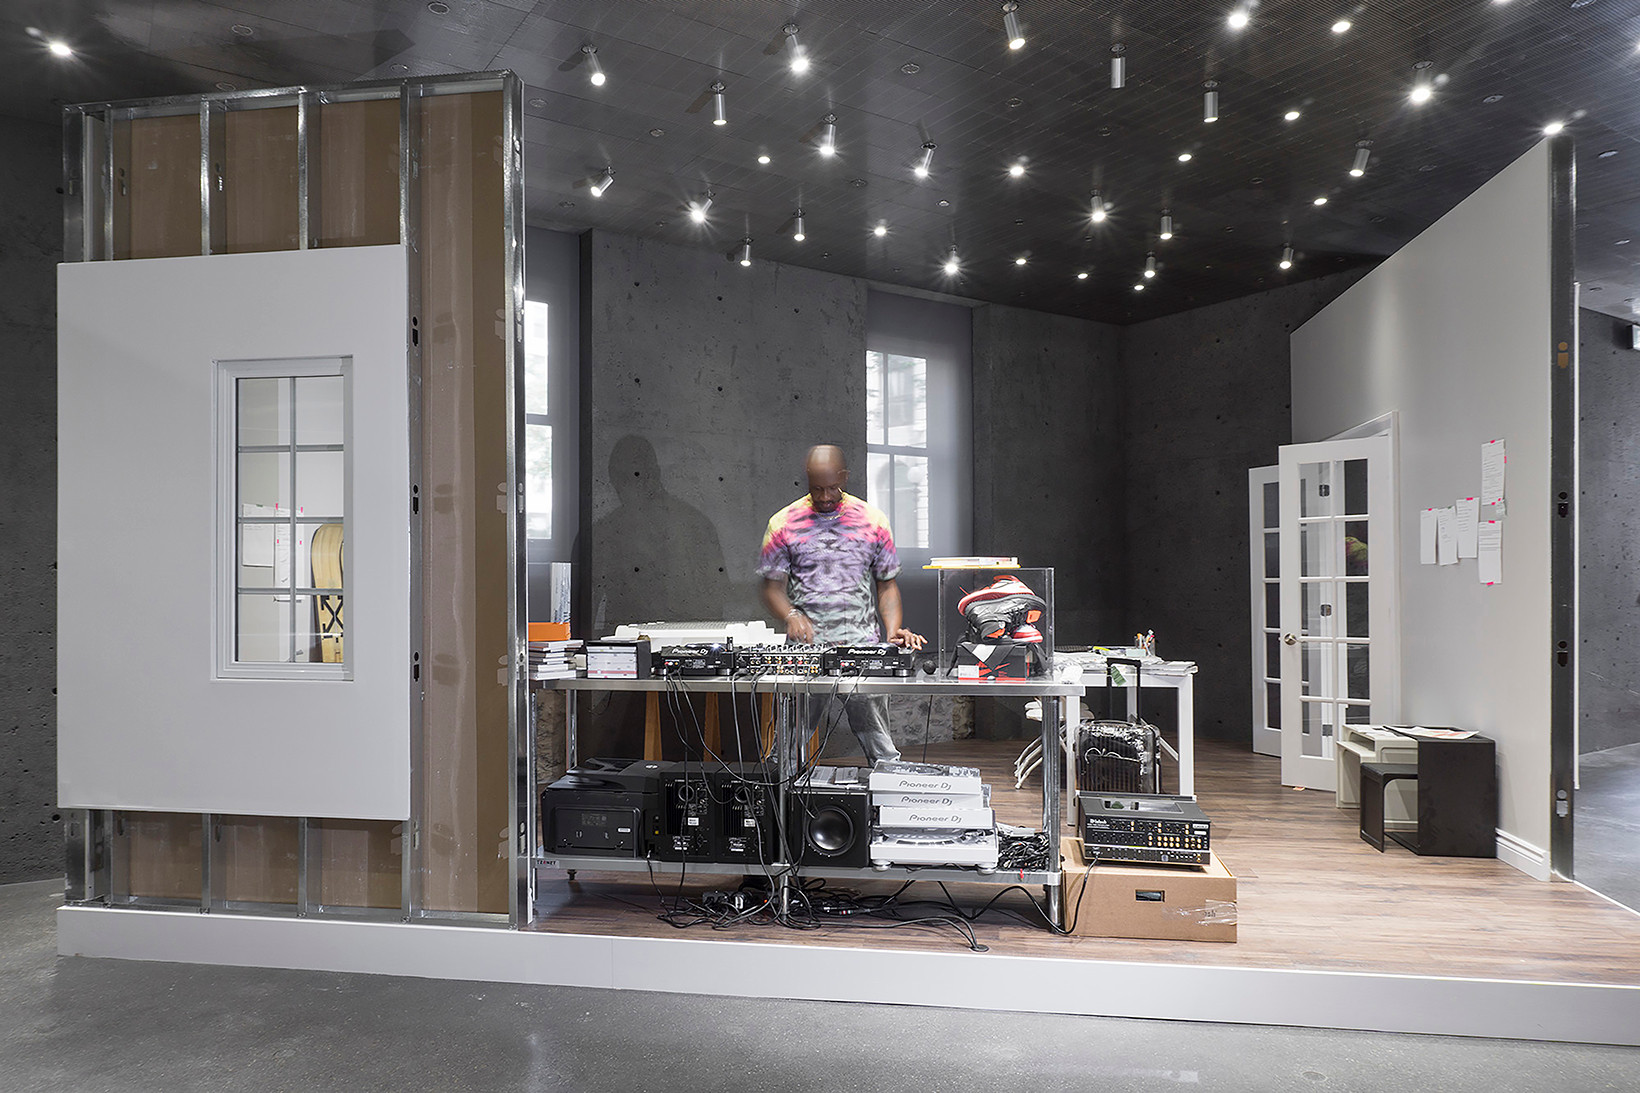 Virgil Abloh and SSENSE Team up for “CUTTING ROOM FLOOR” Exhibit